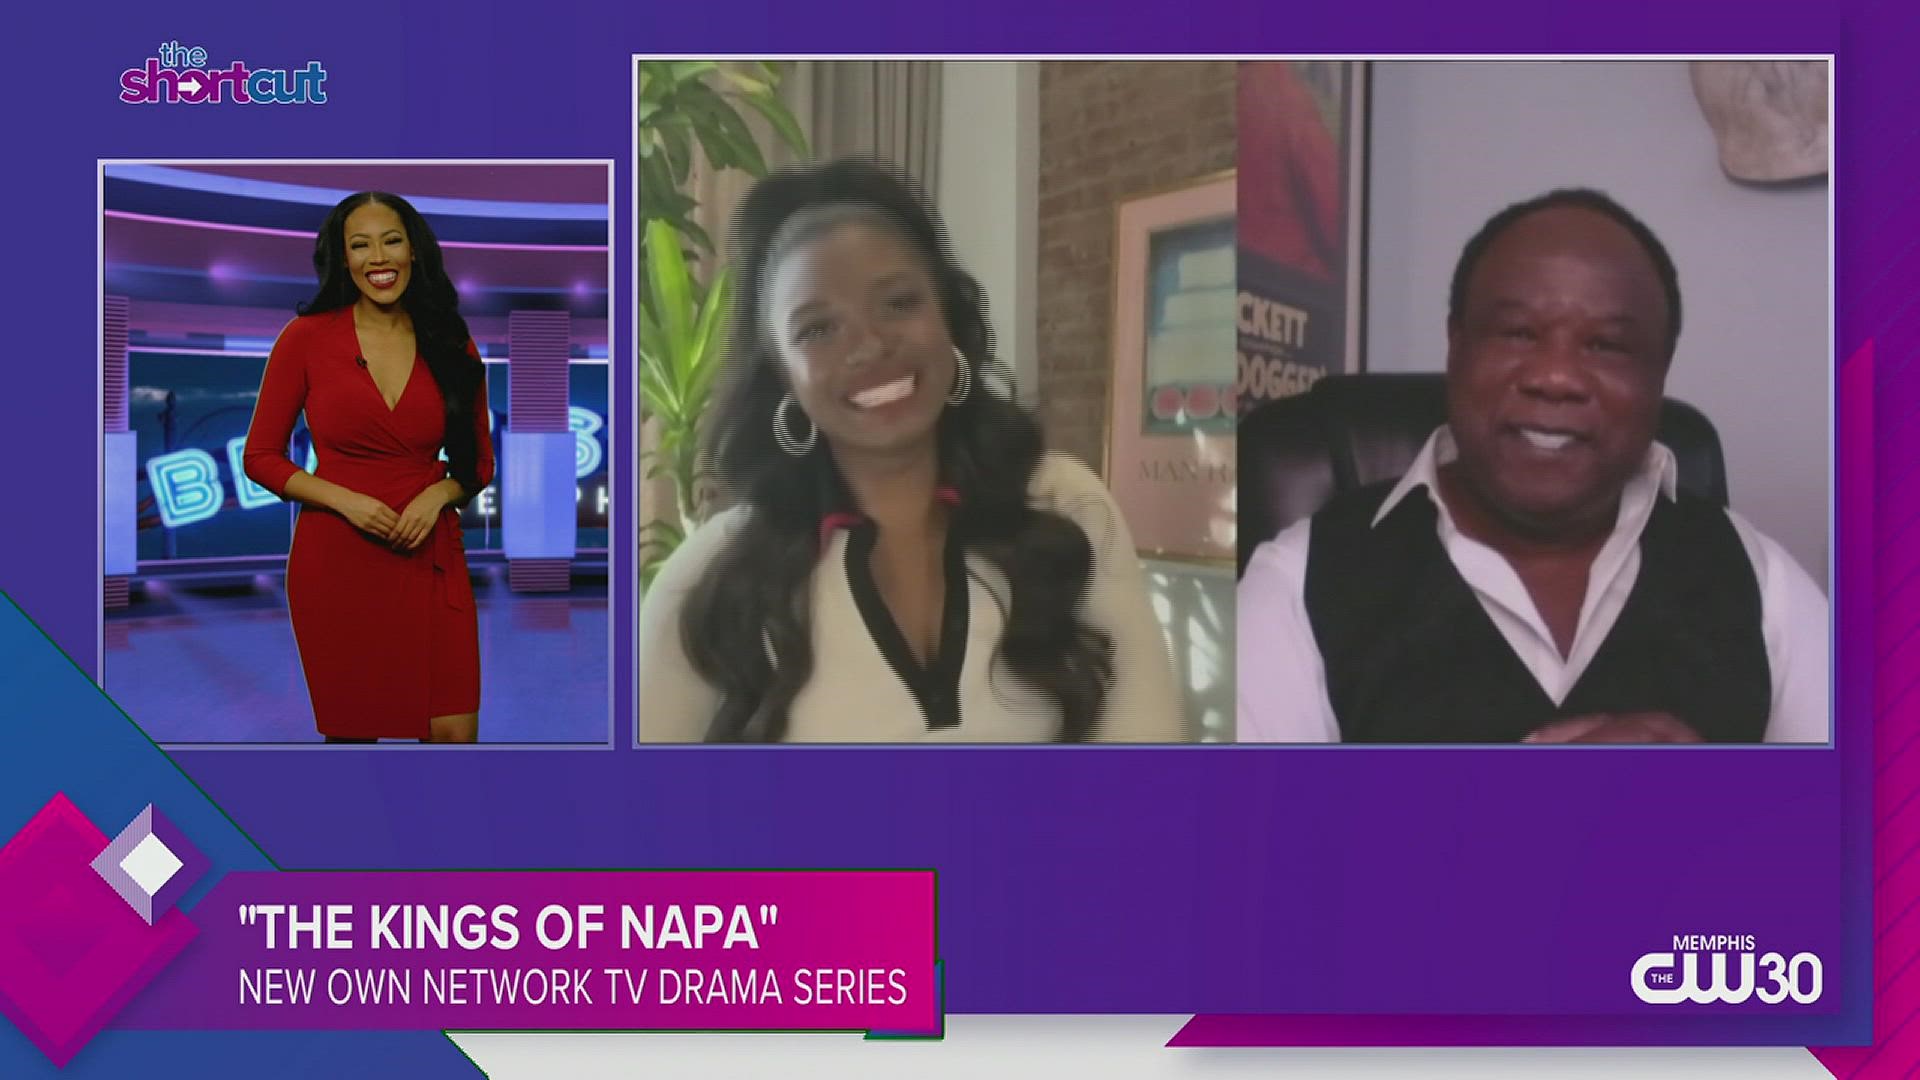 If you're looking for a good family drama to start off 2022, then check out this sneak peak of "The Kings of Napa!" Featuring Ebonee Noel and Isiah Whitlock Jr.!